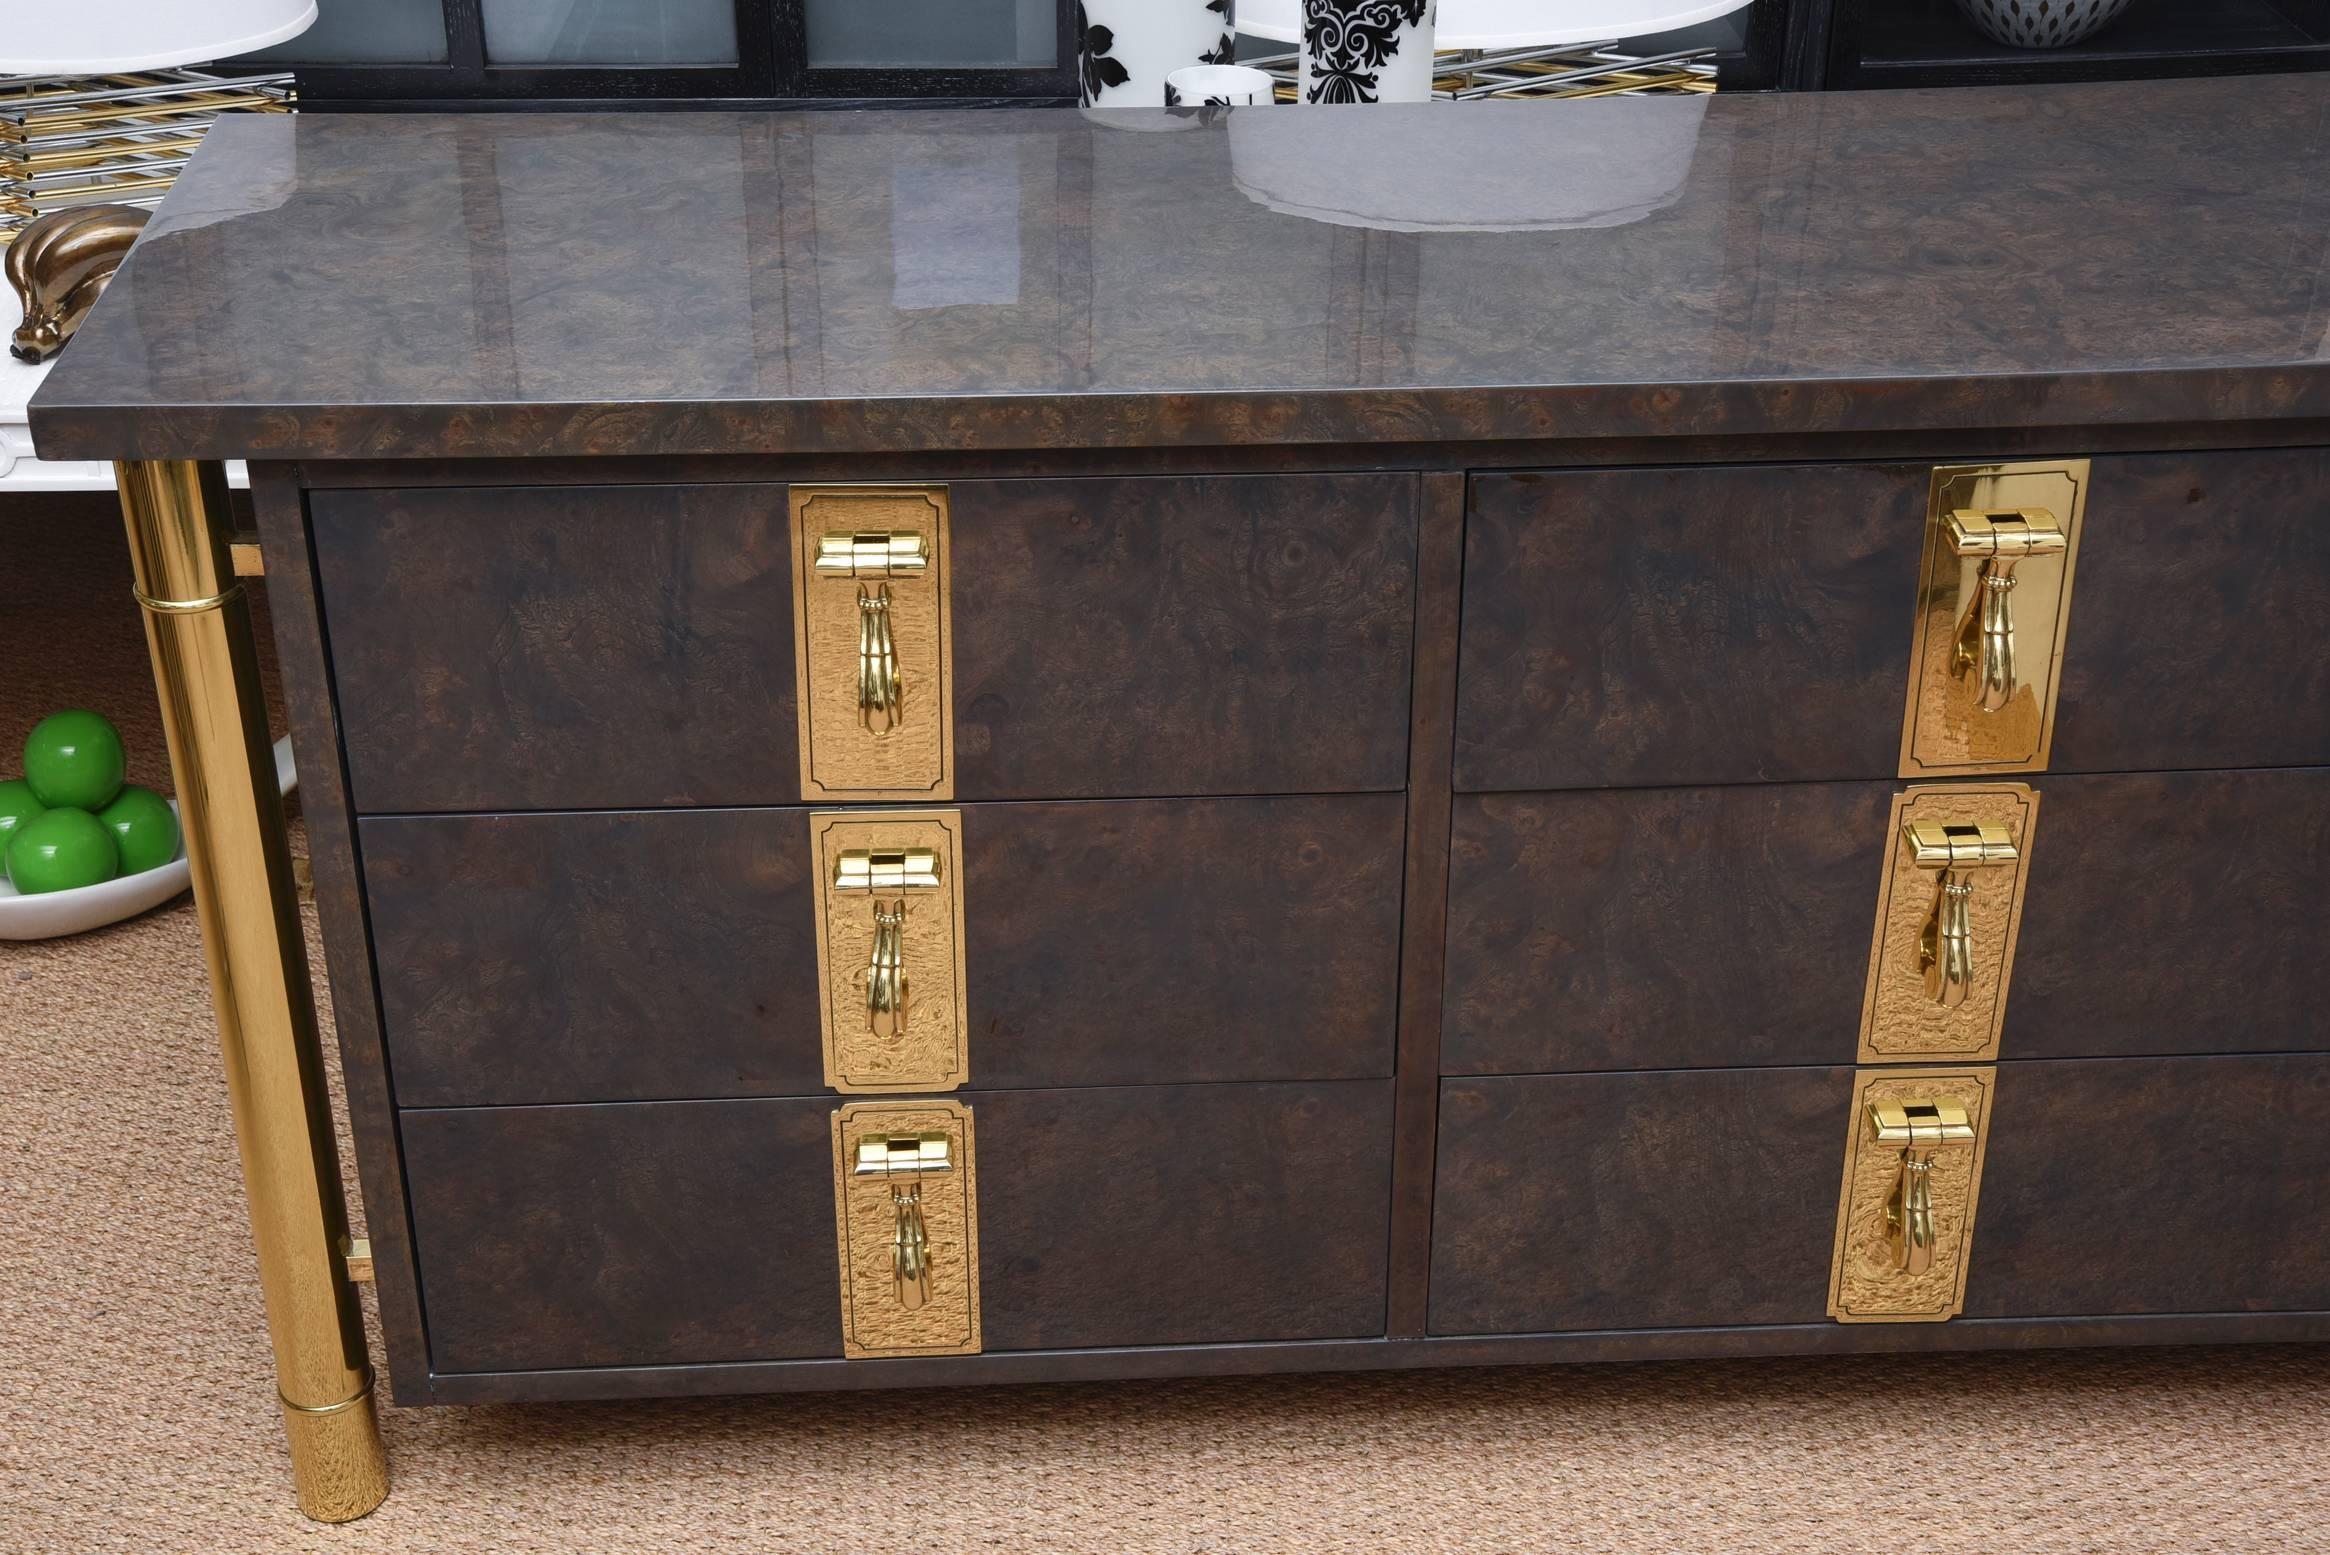 This fabulous newly restored Mastercraft burl elm wood dresser has heavy substantial solid brass knockers as the pulls and the side panels and column legs are also heavy brass. They have all been polished to beauty. There are nine drawers. The